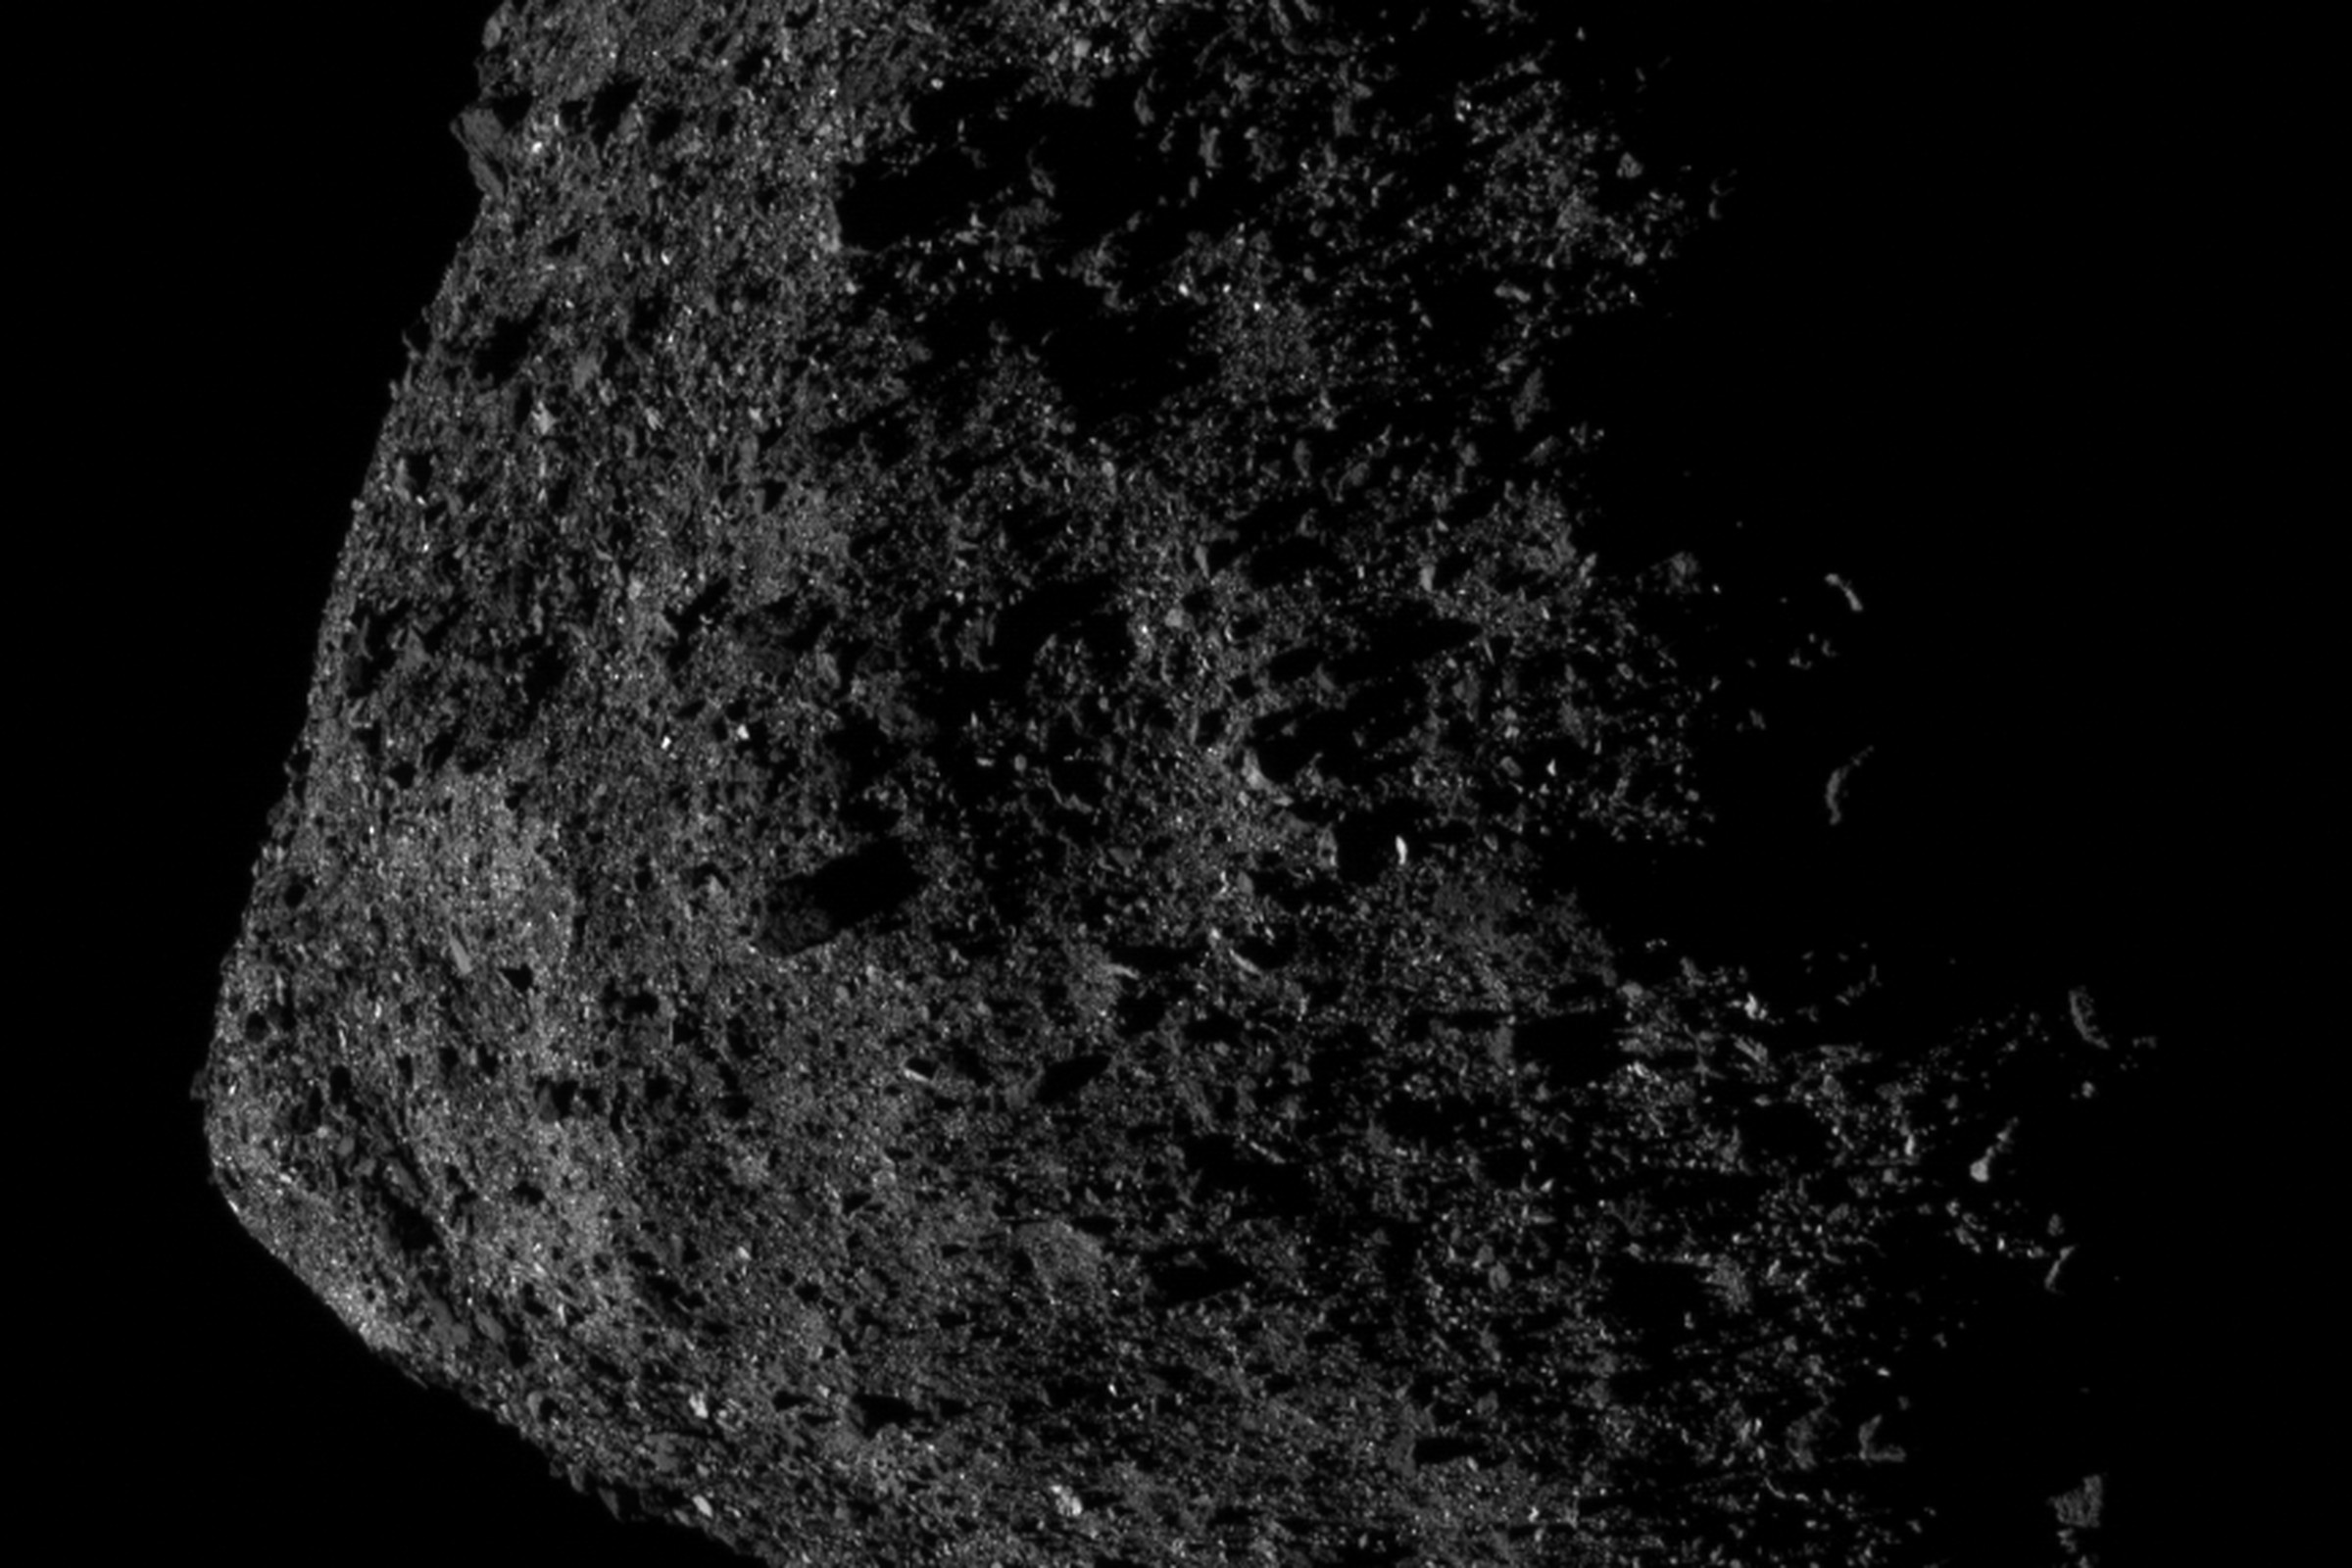 A picture of asteroid Bennu, taken by NASA’s OSIRIS-REx spacecraft from .4 miles away